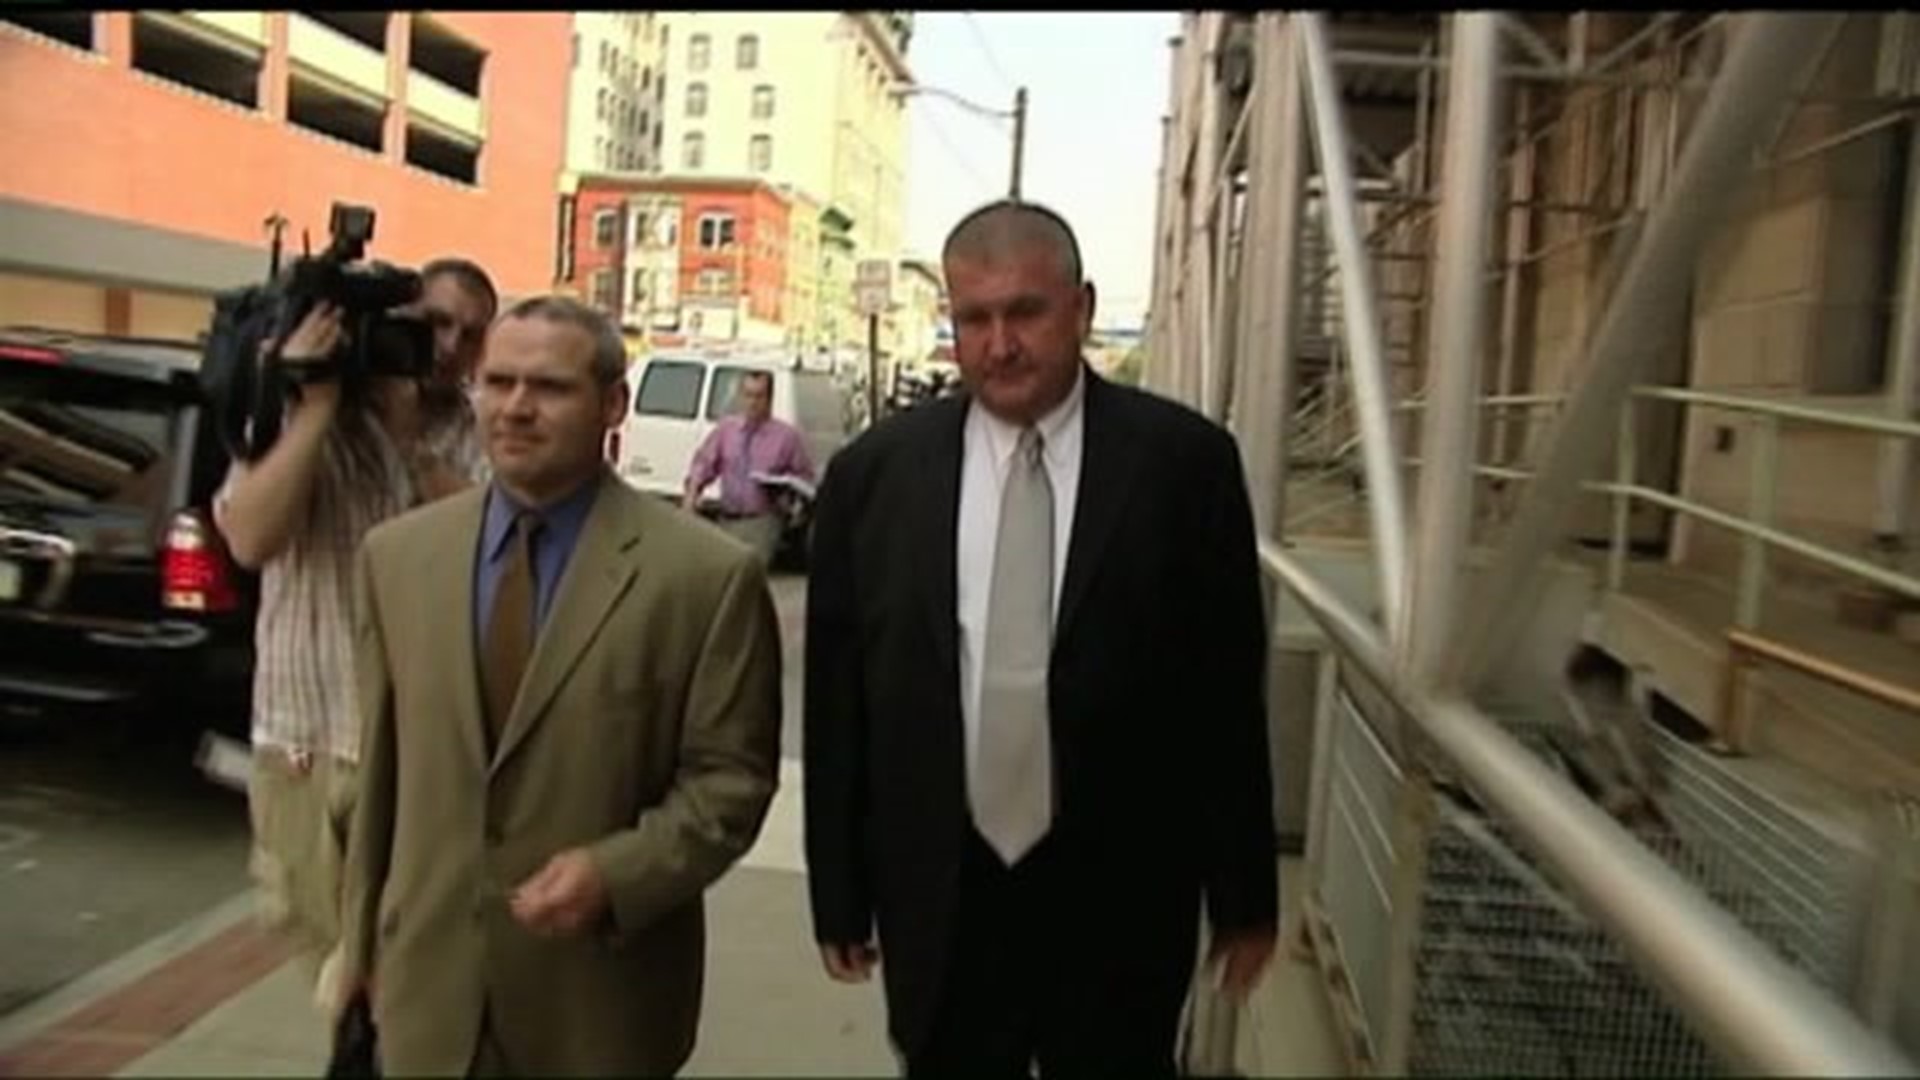 Scranton Funeral Director Facing Federal Charges